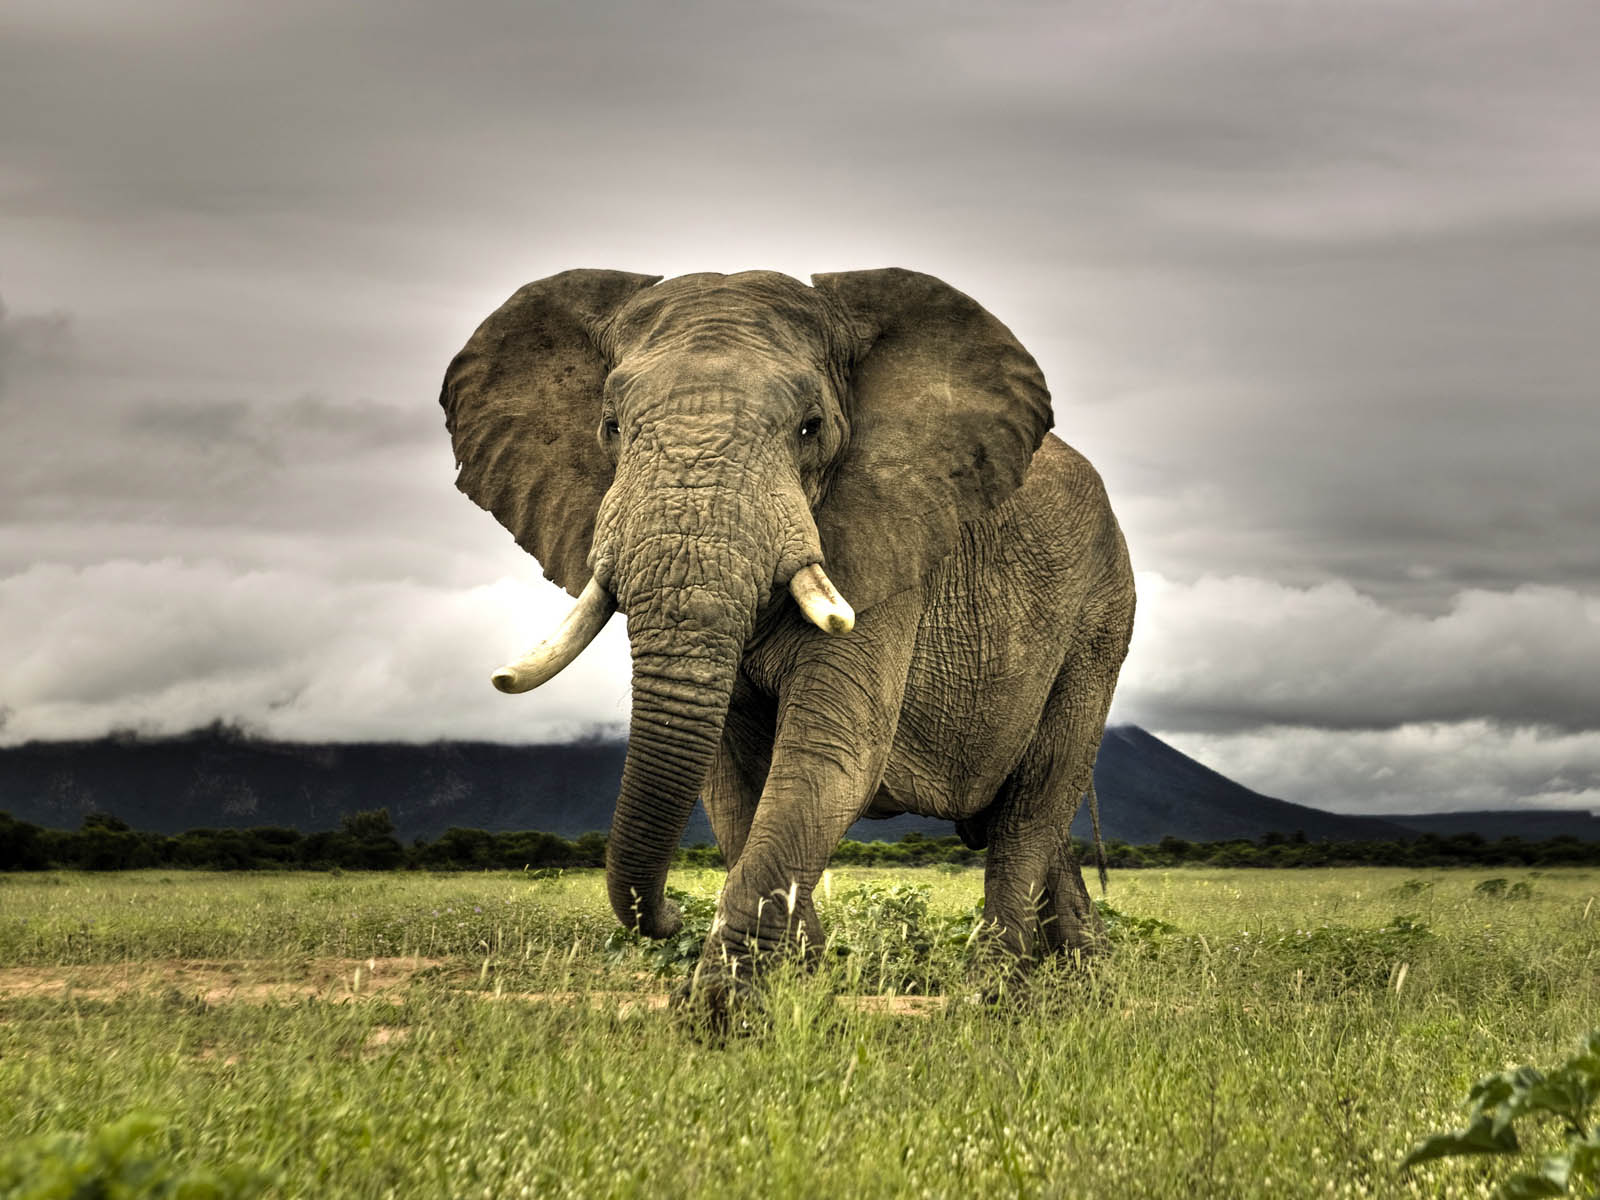 Tag Elephant Wallpapers Images Photos Pictures and Backgrounds for